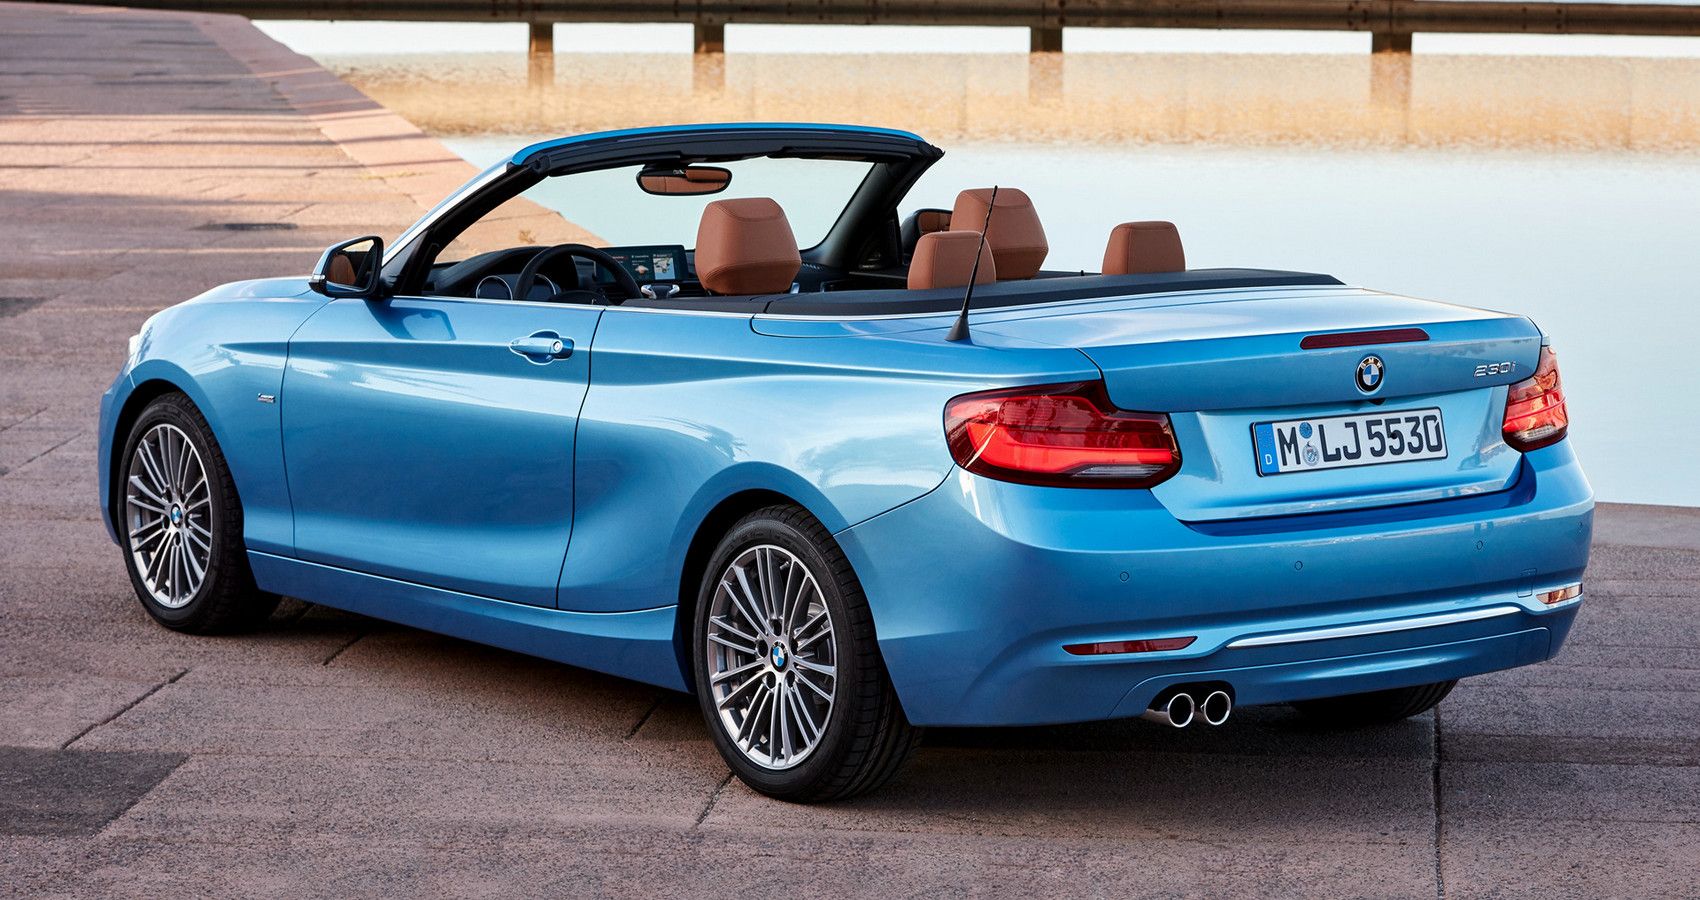 BMW 230i Convertible - Rear view